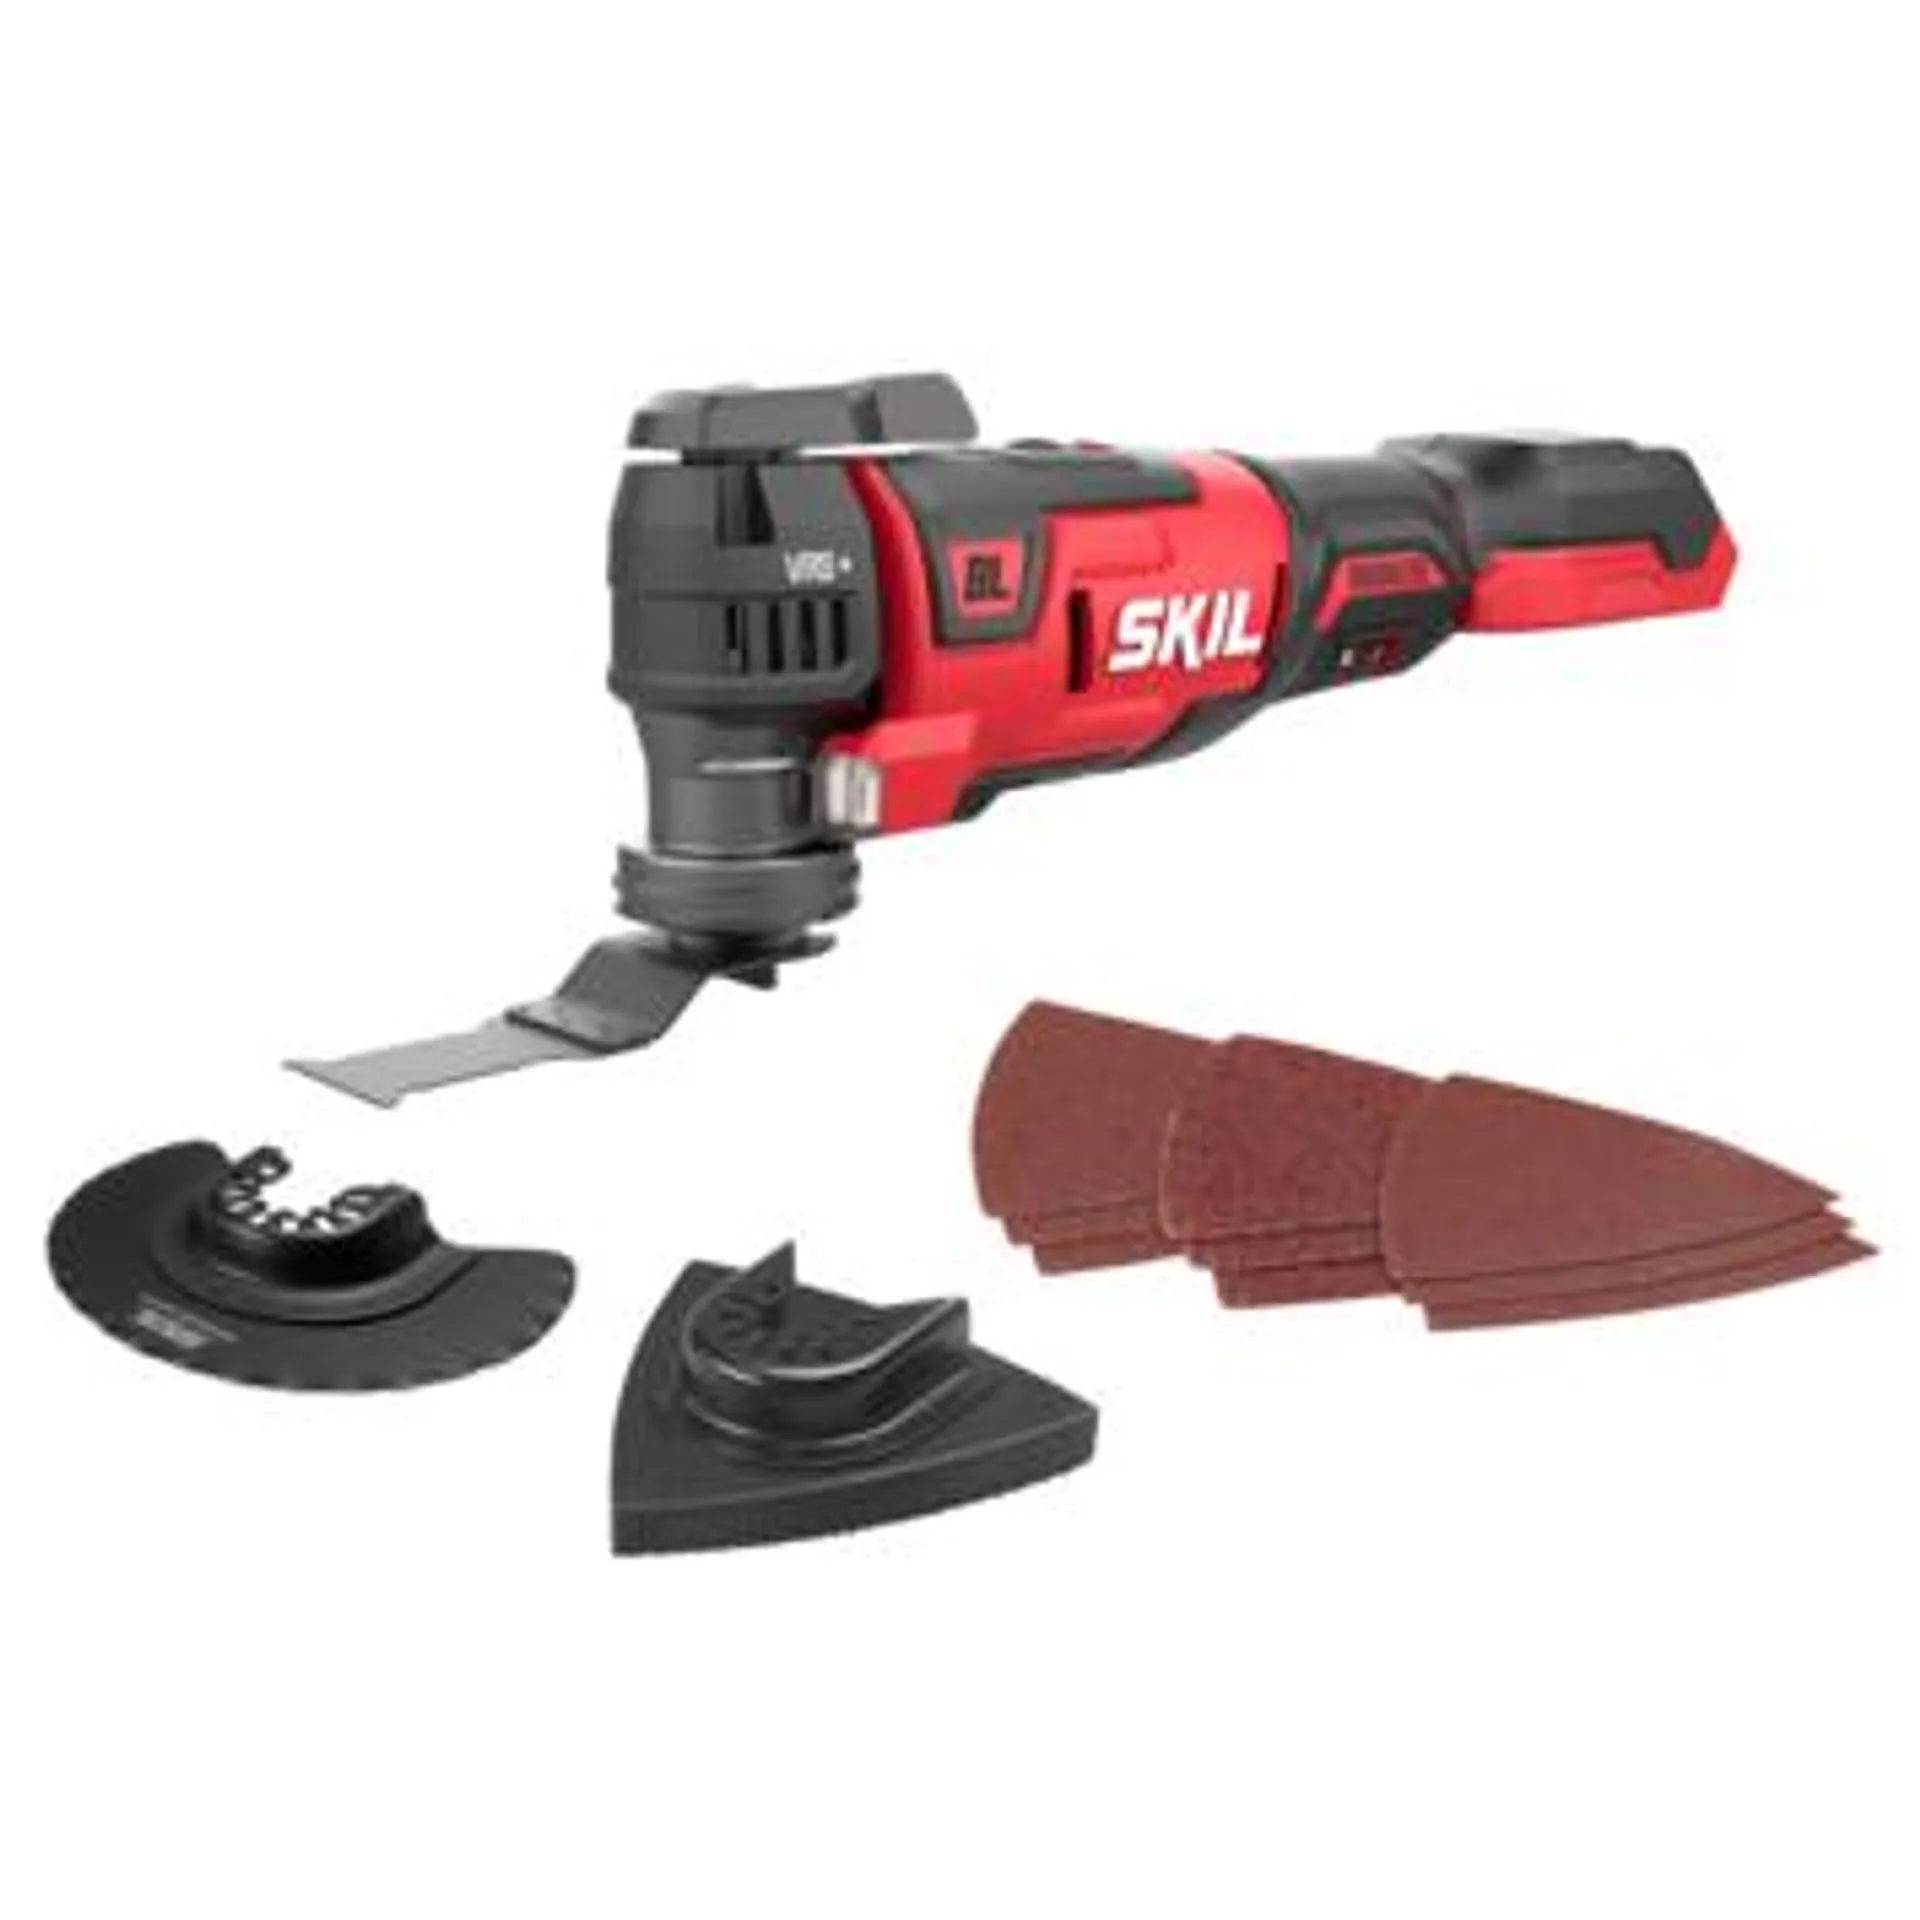 SKIL 20V multitool 3650CA brushless incl. accessoires (zonder accu)